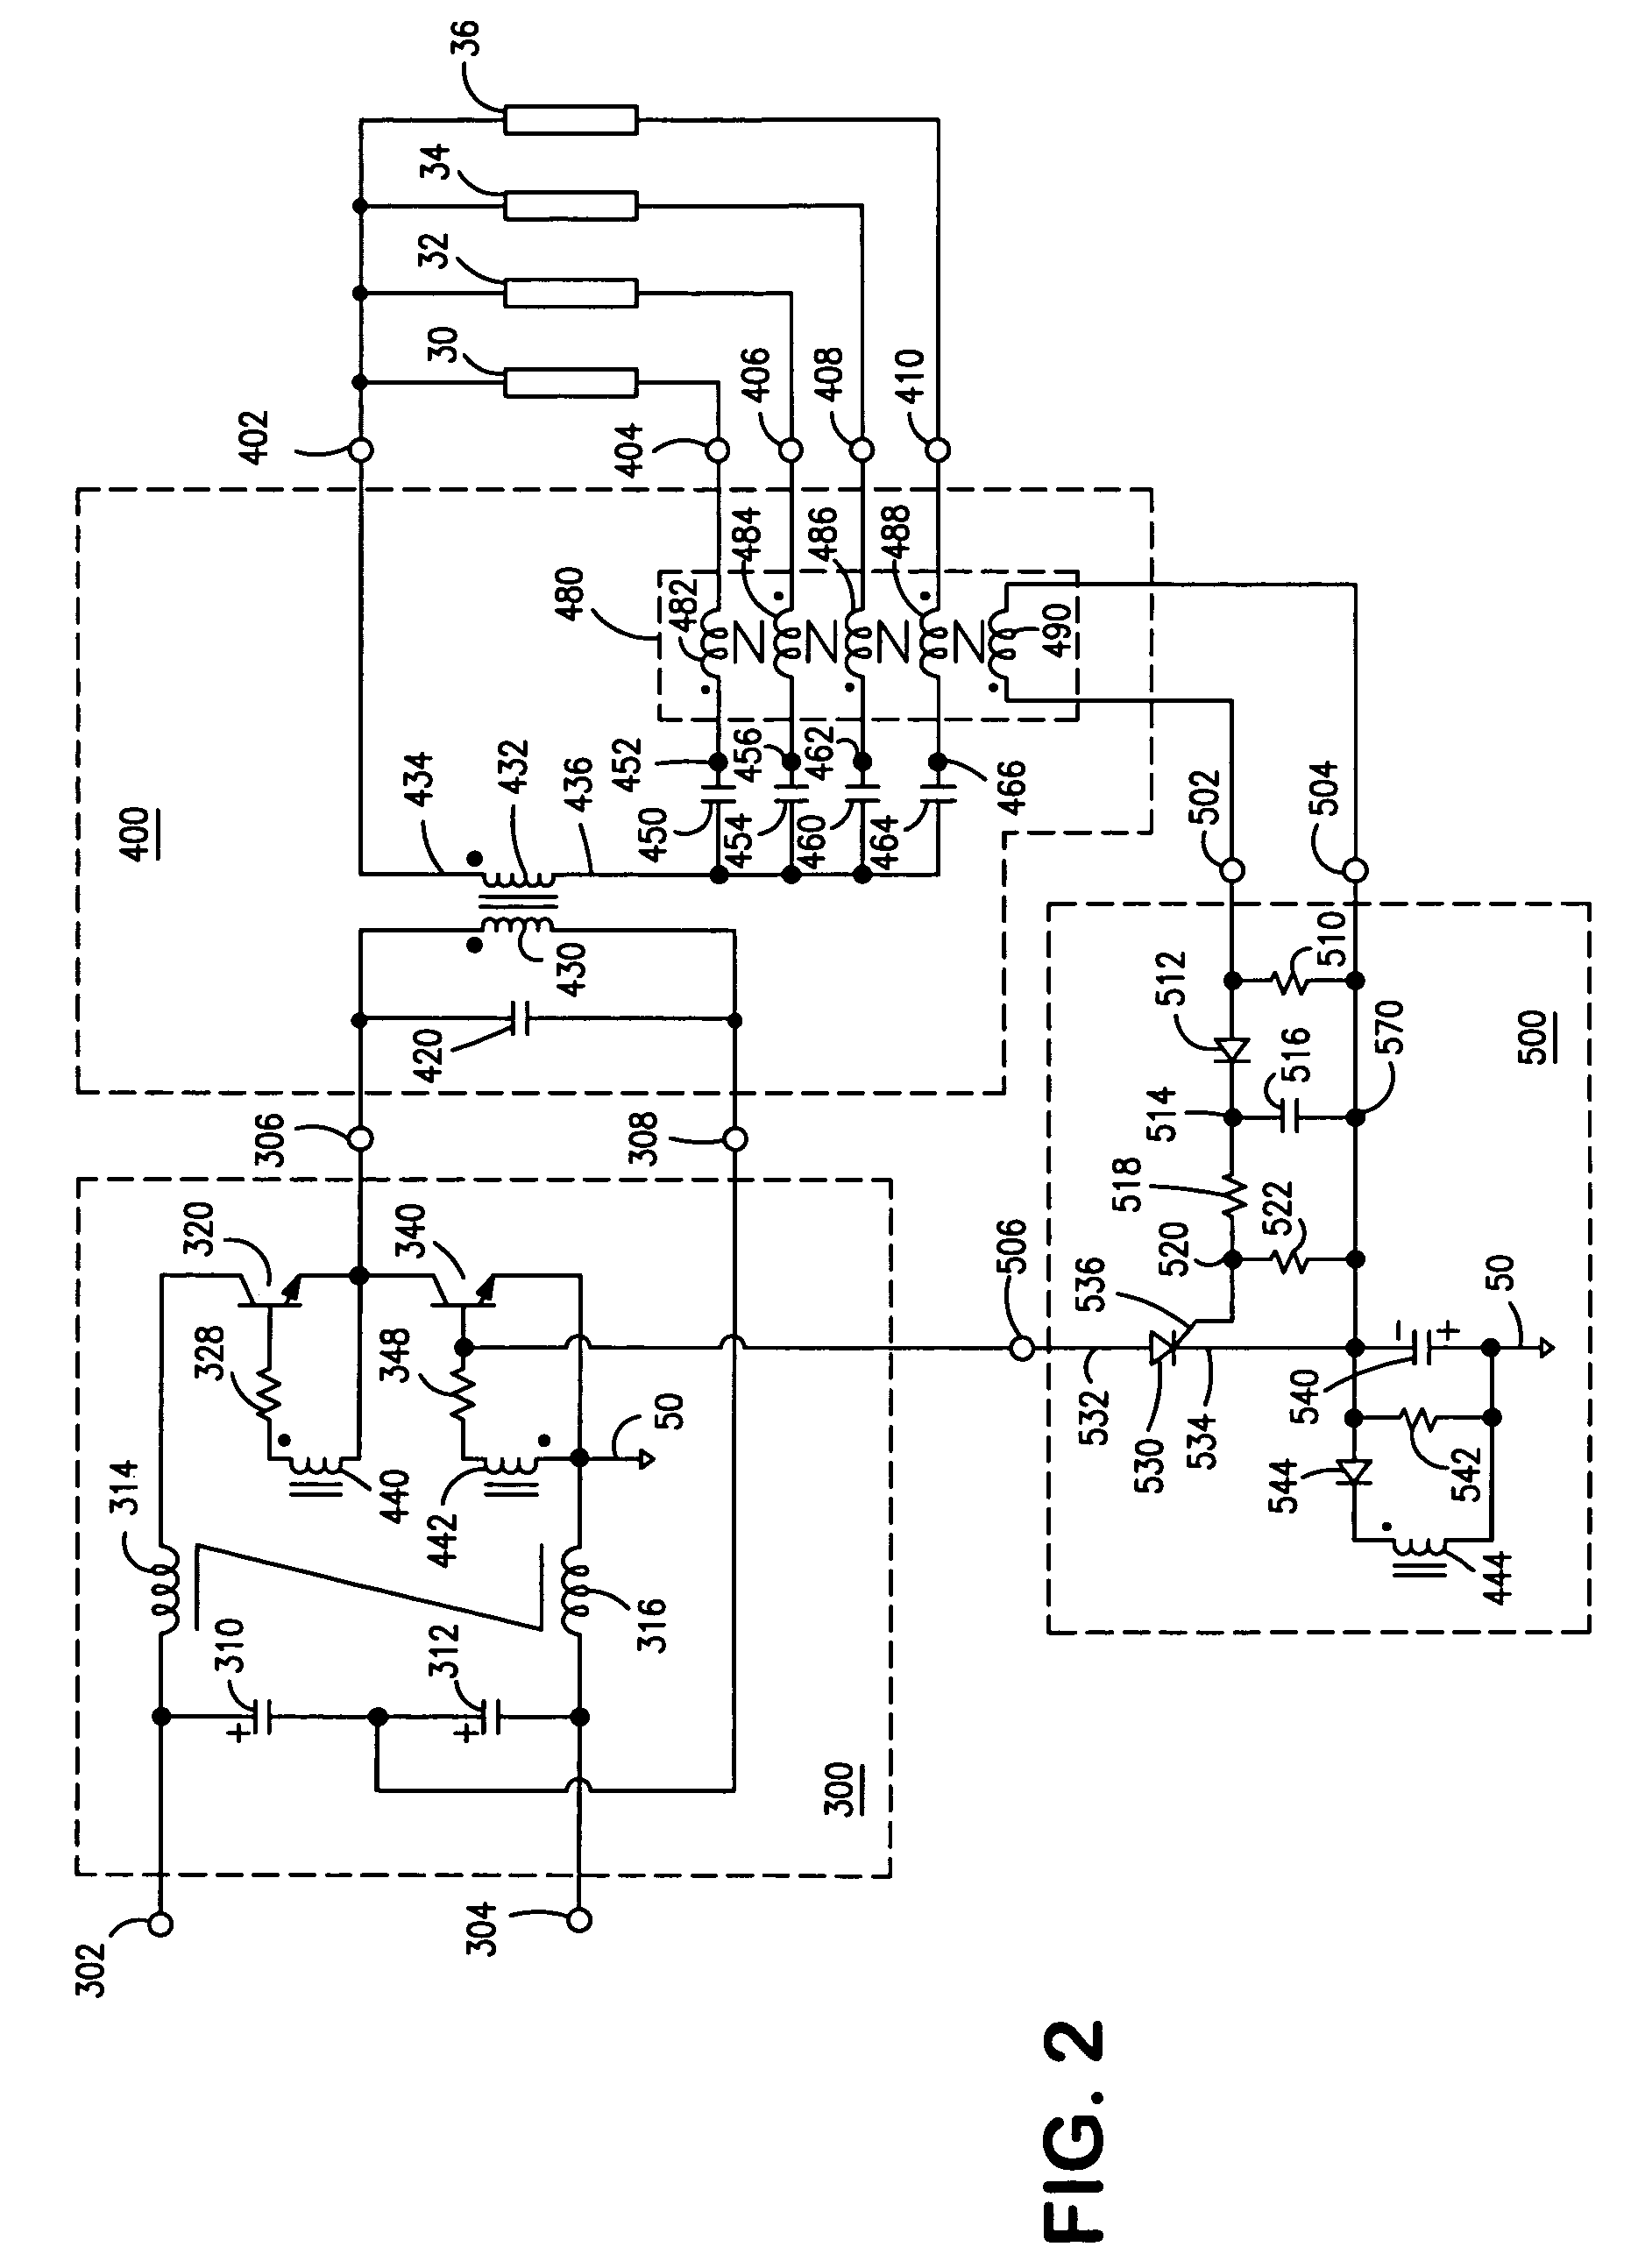 Ballast with end-of-lamp-life protection circuit